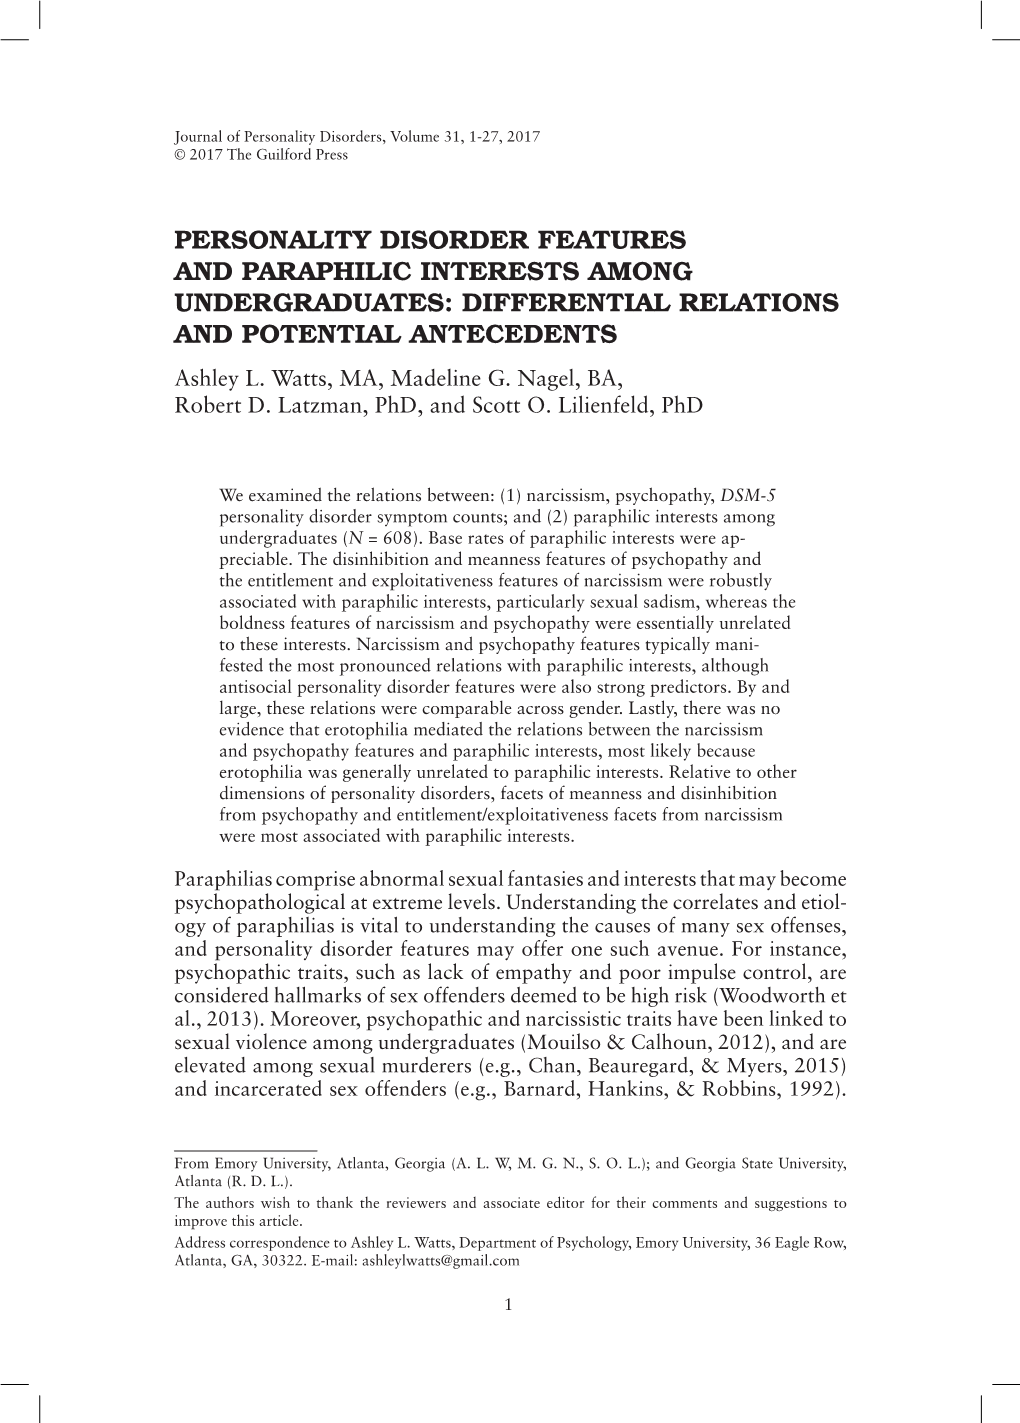 PERSONALITY DISORDER FEATURES and PARAPHILIC INTERESTS AMONG UNDERGRADUATES: DIFFERENTIAL RELATIONS and POTENTIAL ANTECEDENTS Ashley L